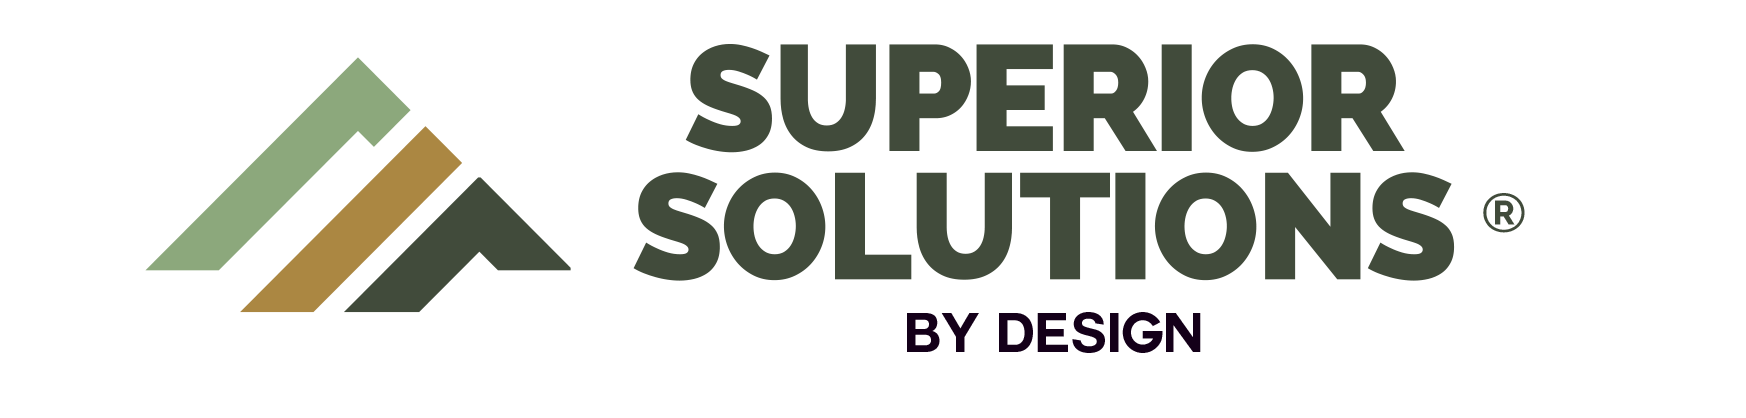 Superior Solutions By Design